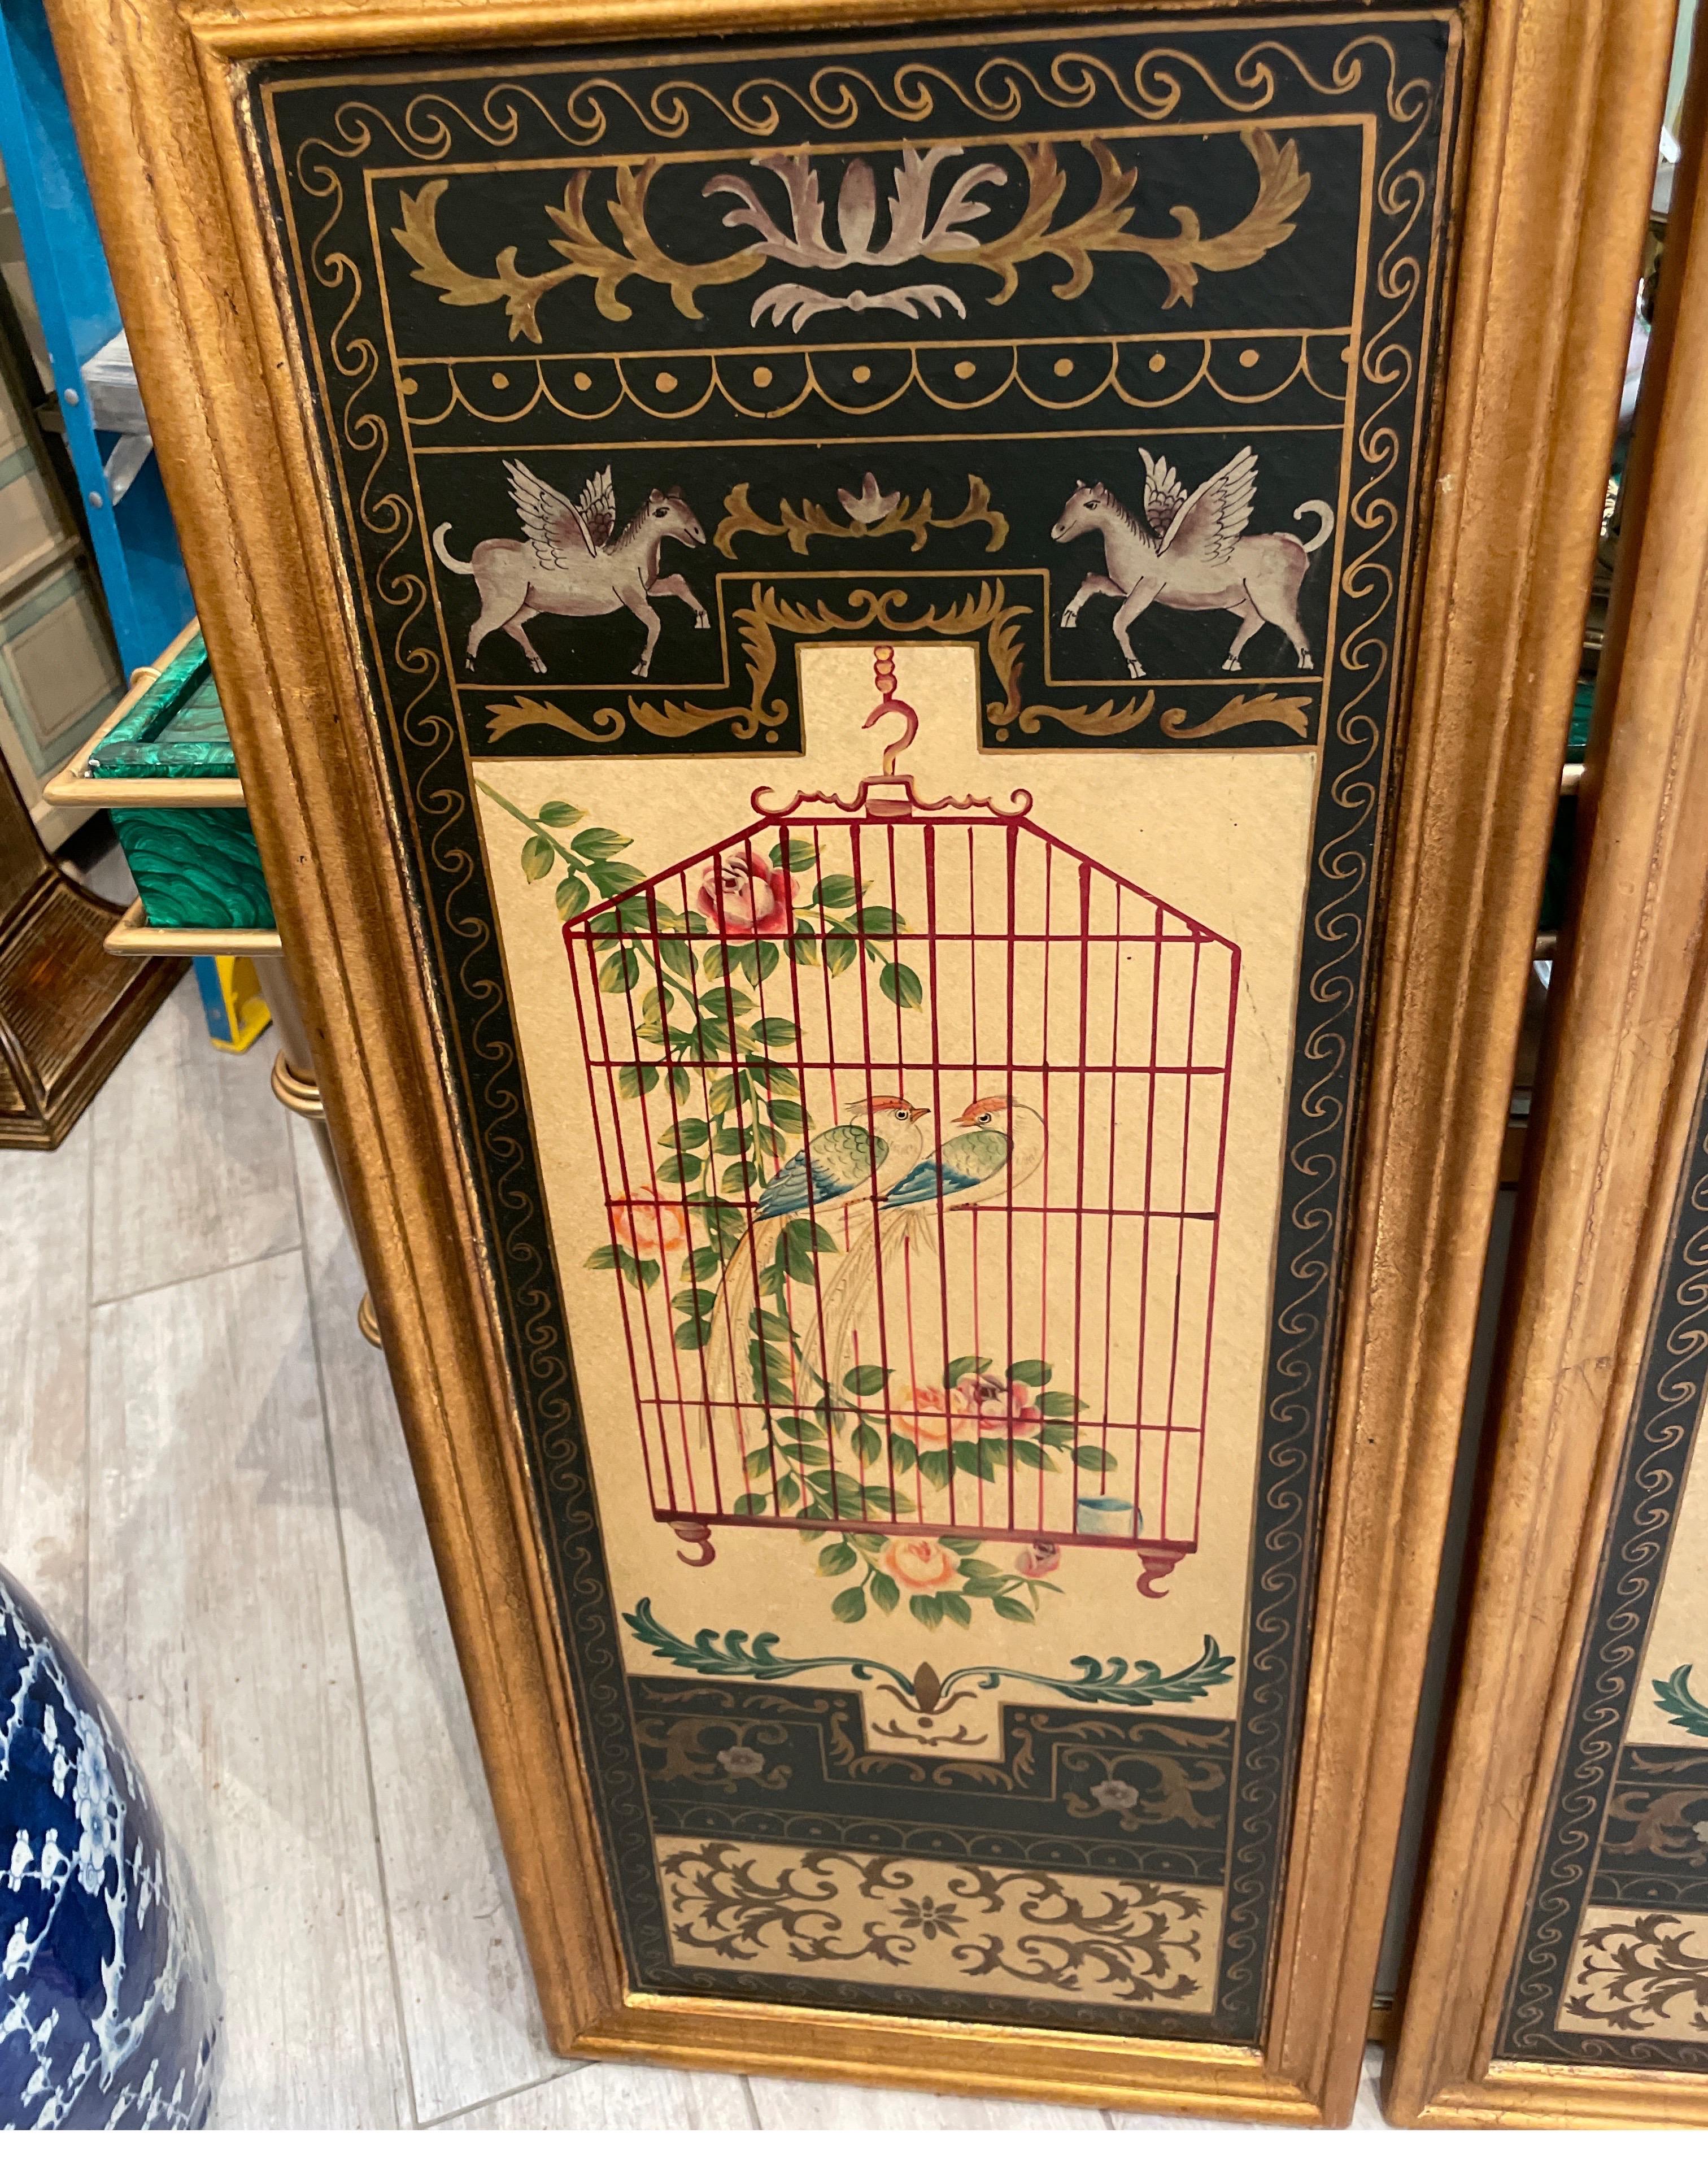 Vintage pair of Neoclassical wall panels featuring opposing birds in their cages surrounded by foliage. They are on wood panels with gilded frame.